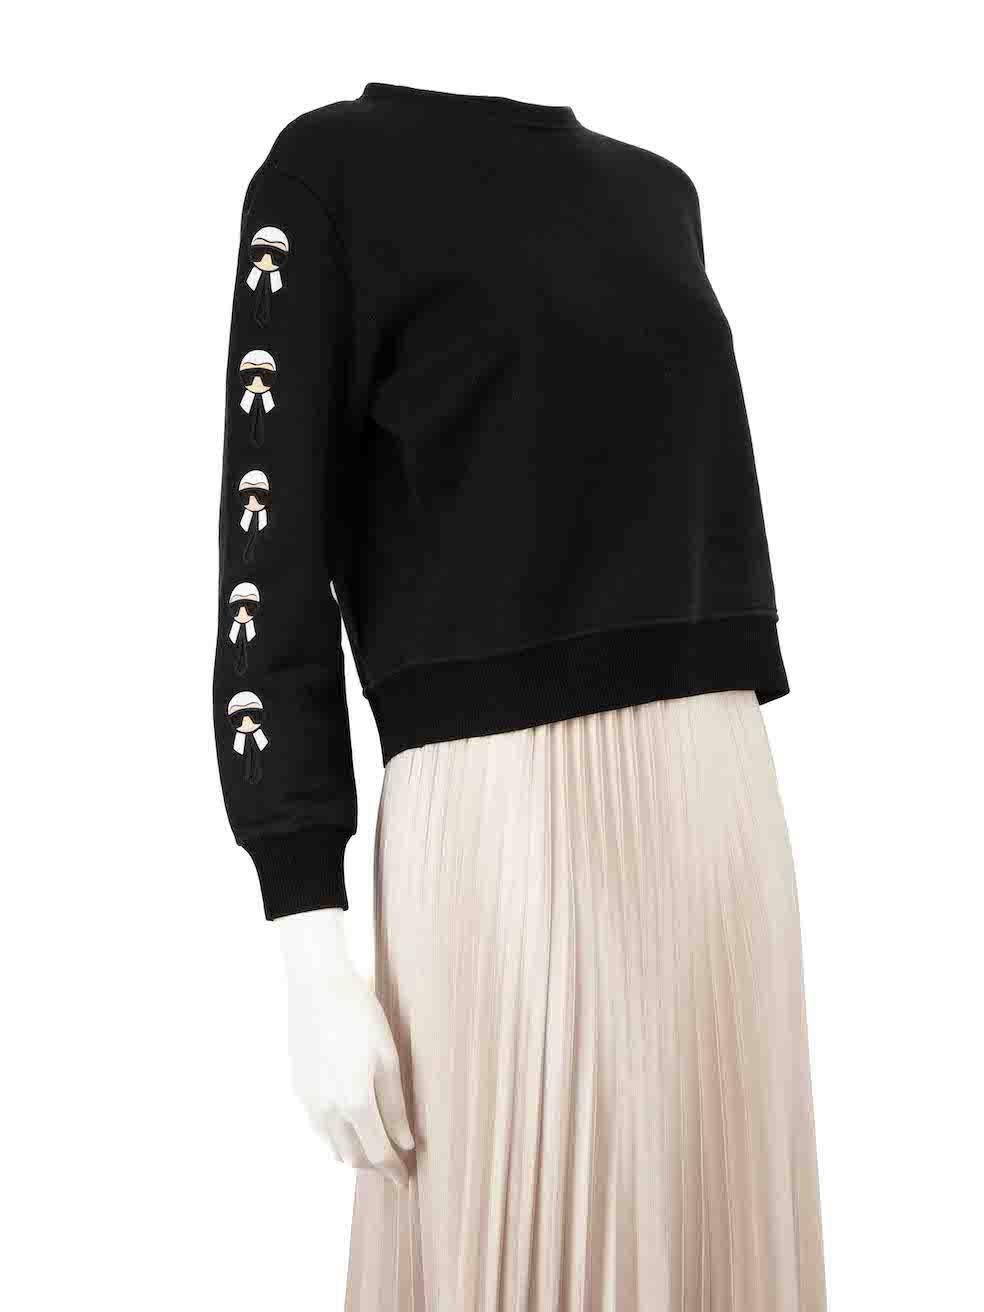 CONDITION is Very good. Minimal wear to jumper is evident. Minimal wear to internal side seam with loose threads and small mark to centre front on this used Fendi designer resale item.
 
 
 
 Details
 
 
 Black
 
 Cotton
 
 Long sleeves sweatshirt
